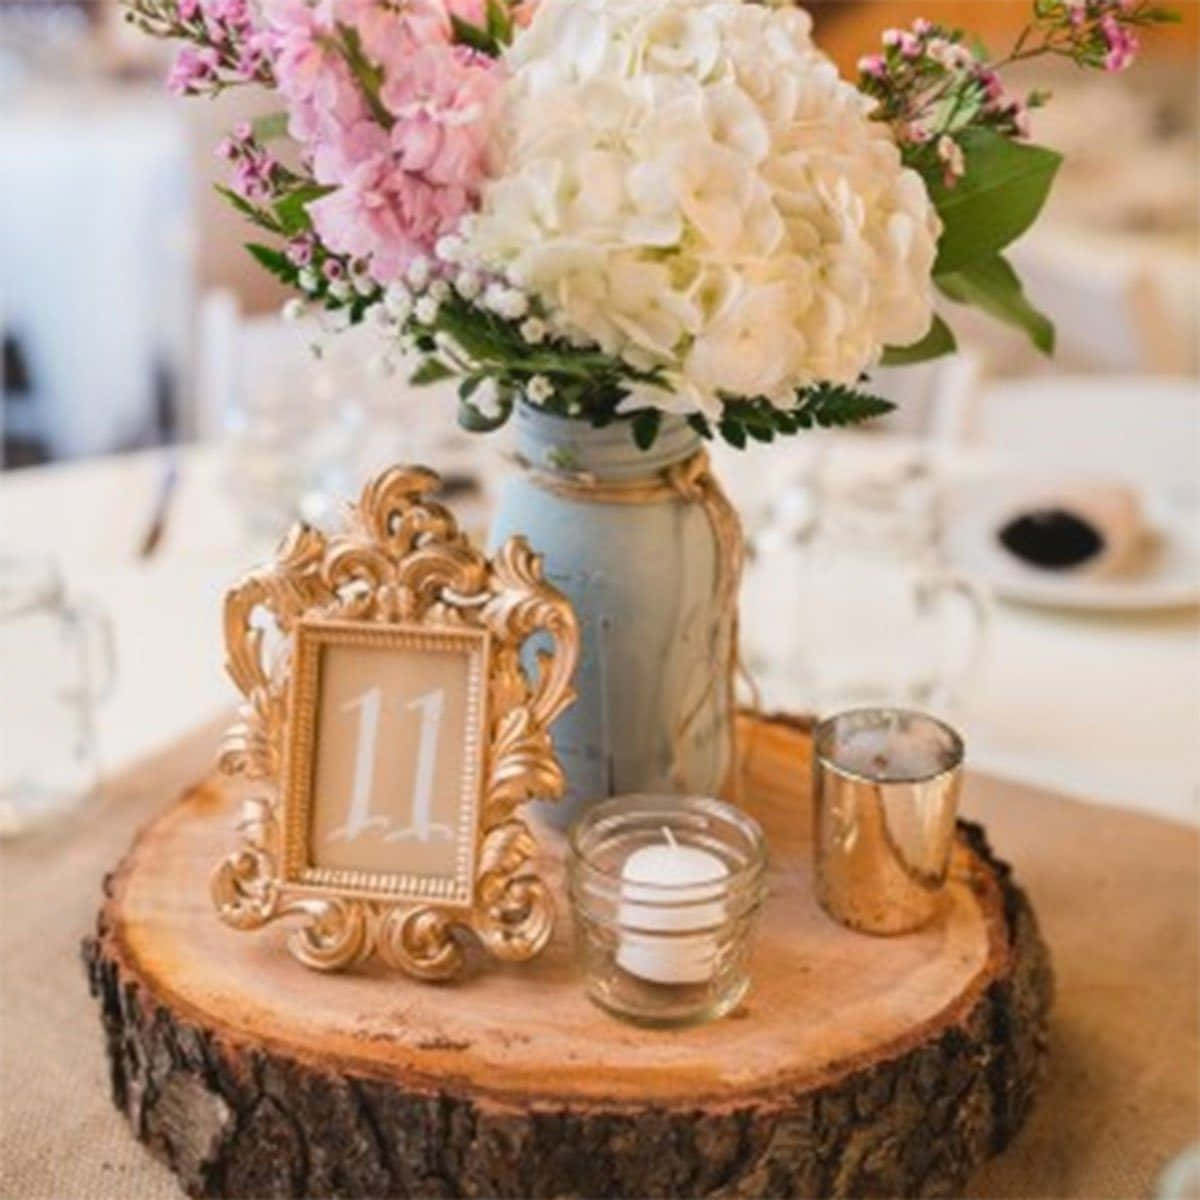 Brightly-colored table centerpiece with autumnal leaves and vintage jars. Wallpaper